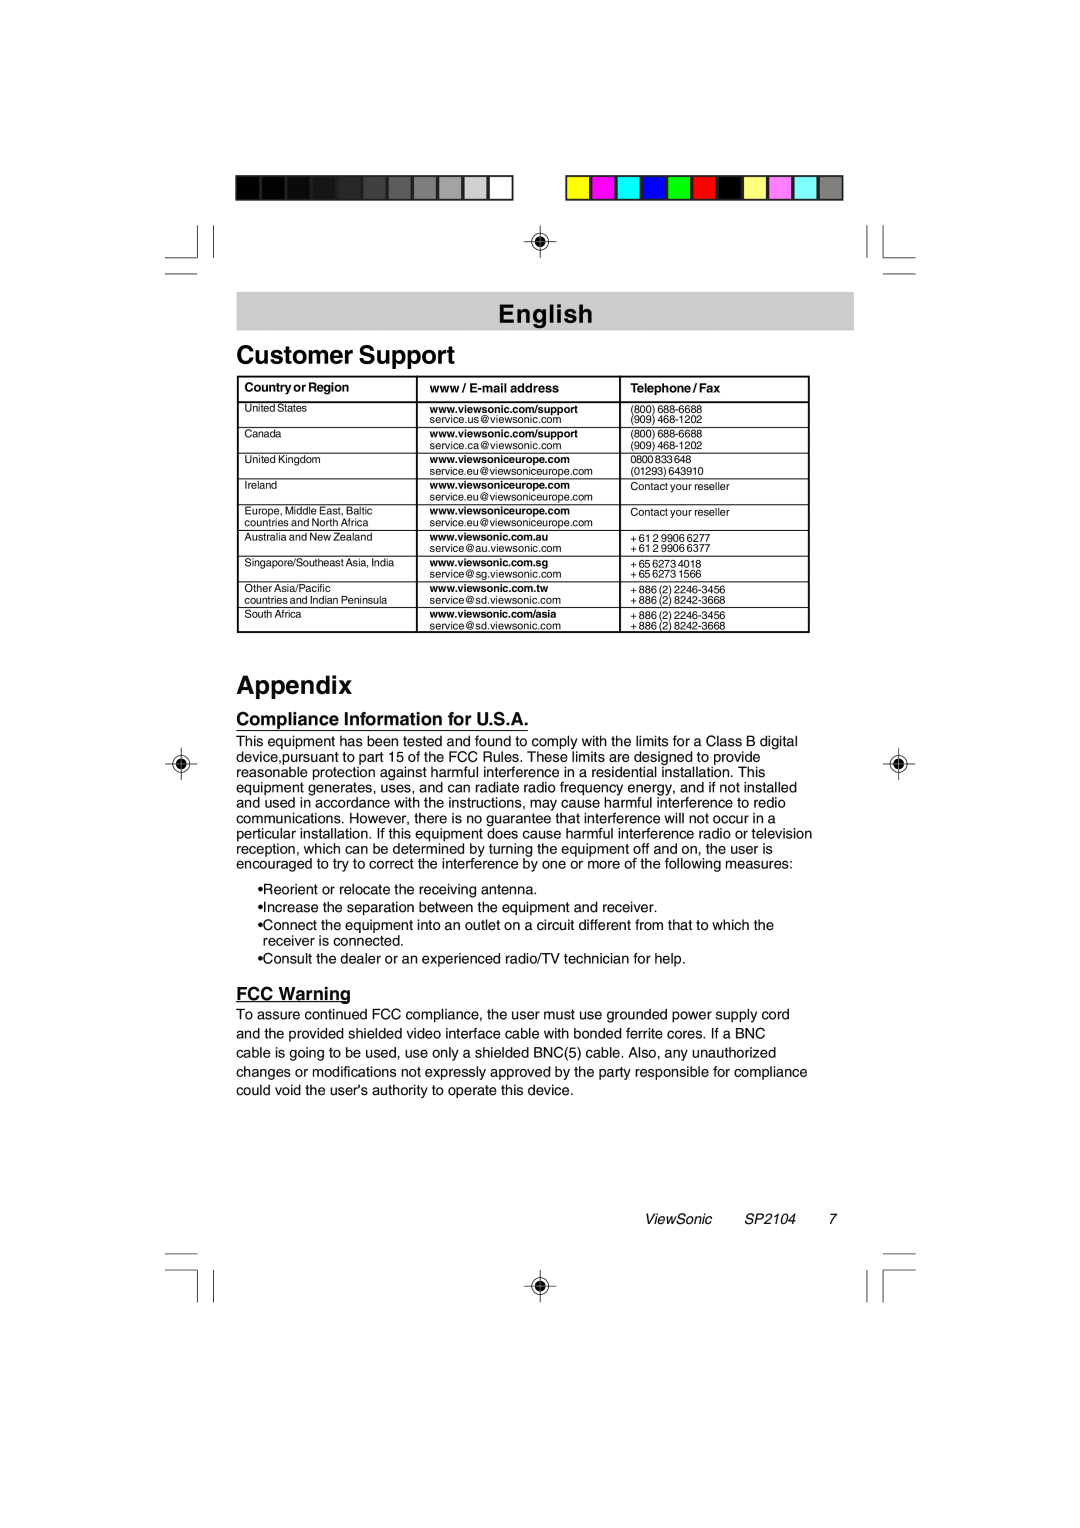 ViewSonic VSACC27952-1 English Customer Support, Appendix, Compliance Information for U.S.A, FCC Warning, ViewSonic SP2104 